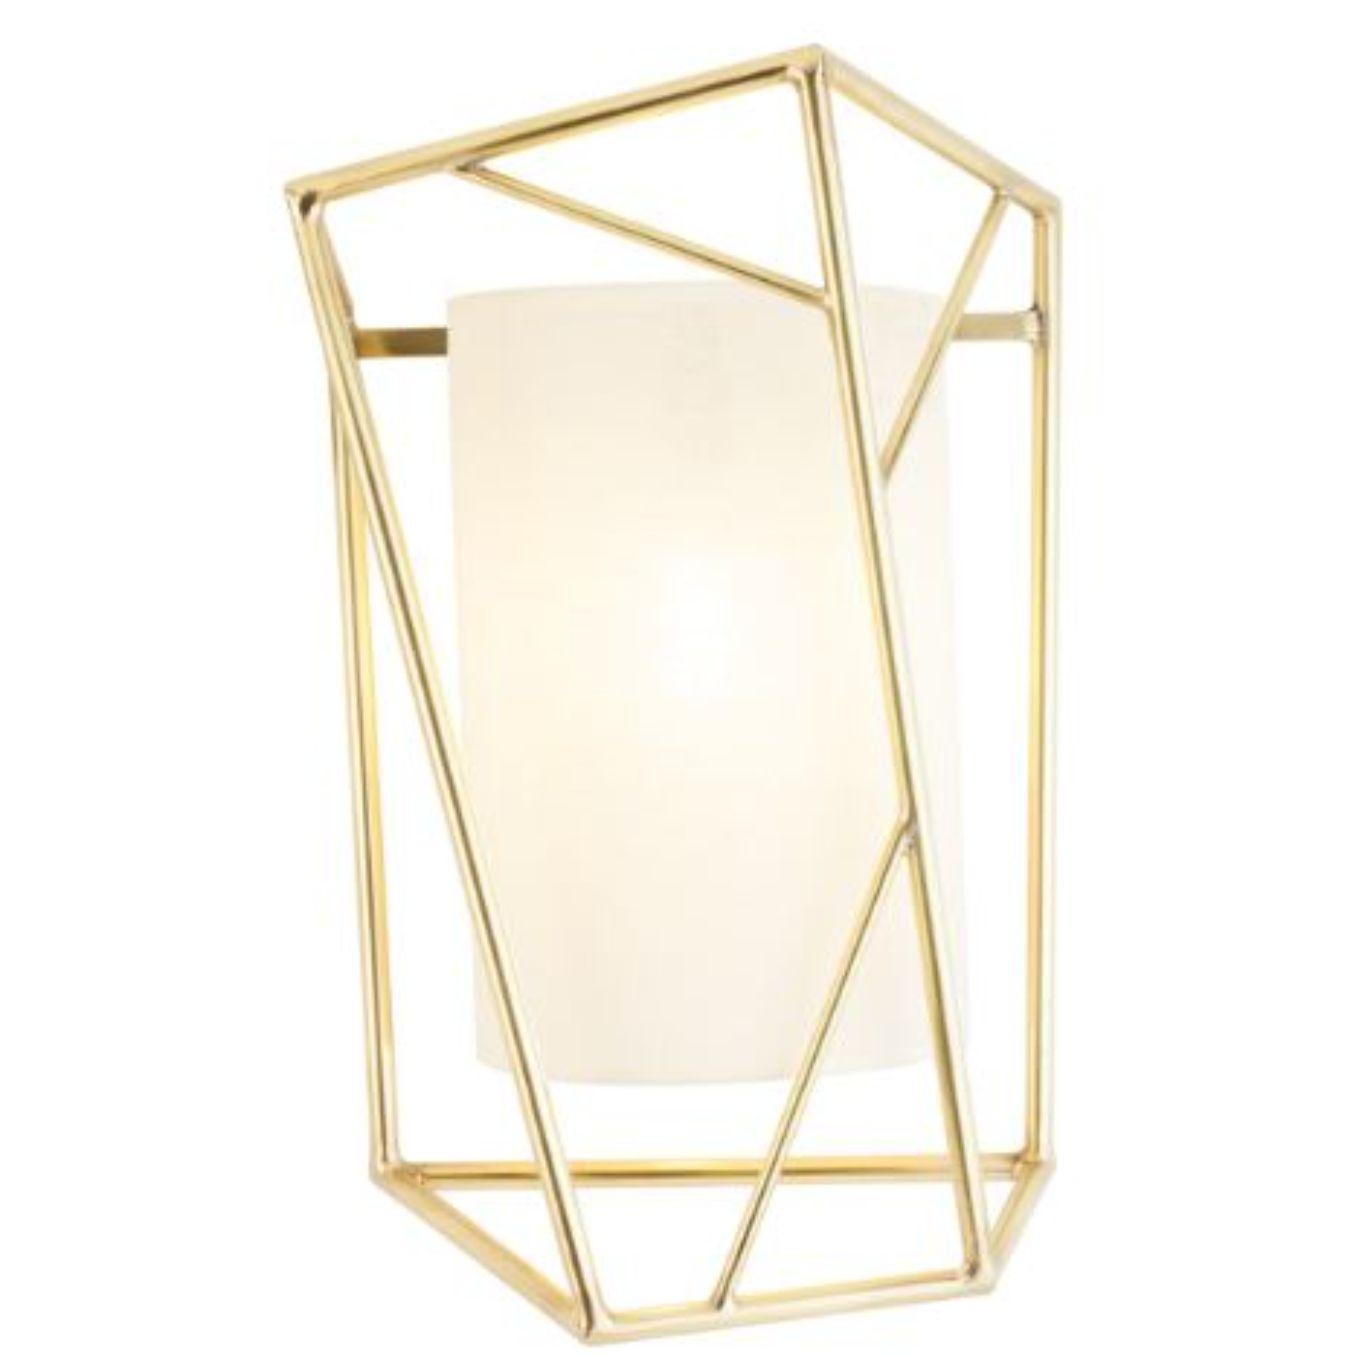 Brass Star wall lamp by Dooq
Dimensions: W 28 x D 20 x H 51 cm
Materials: lacquered metal, polished or satin metal, brass.
abat-jour: linen
Also available in different colors and materials.

Information:
230V/50Hz
E14/1x15W